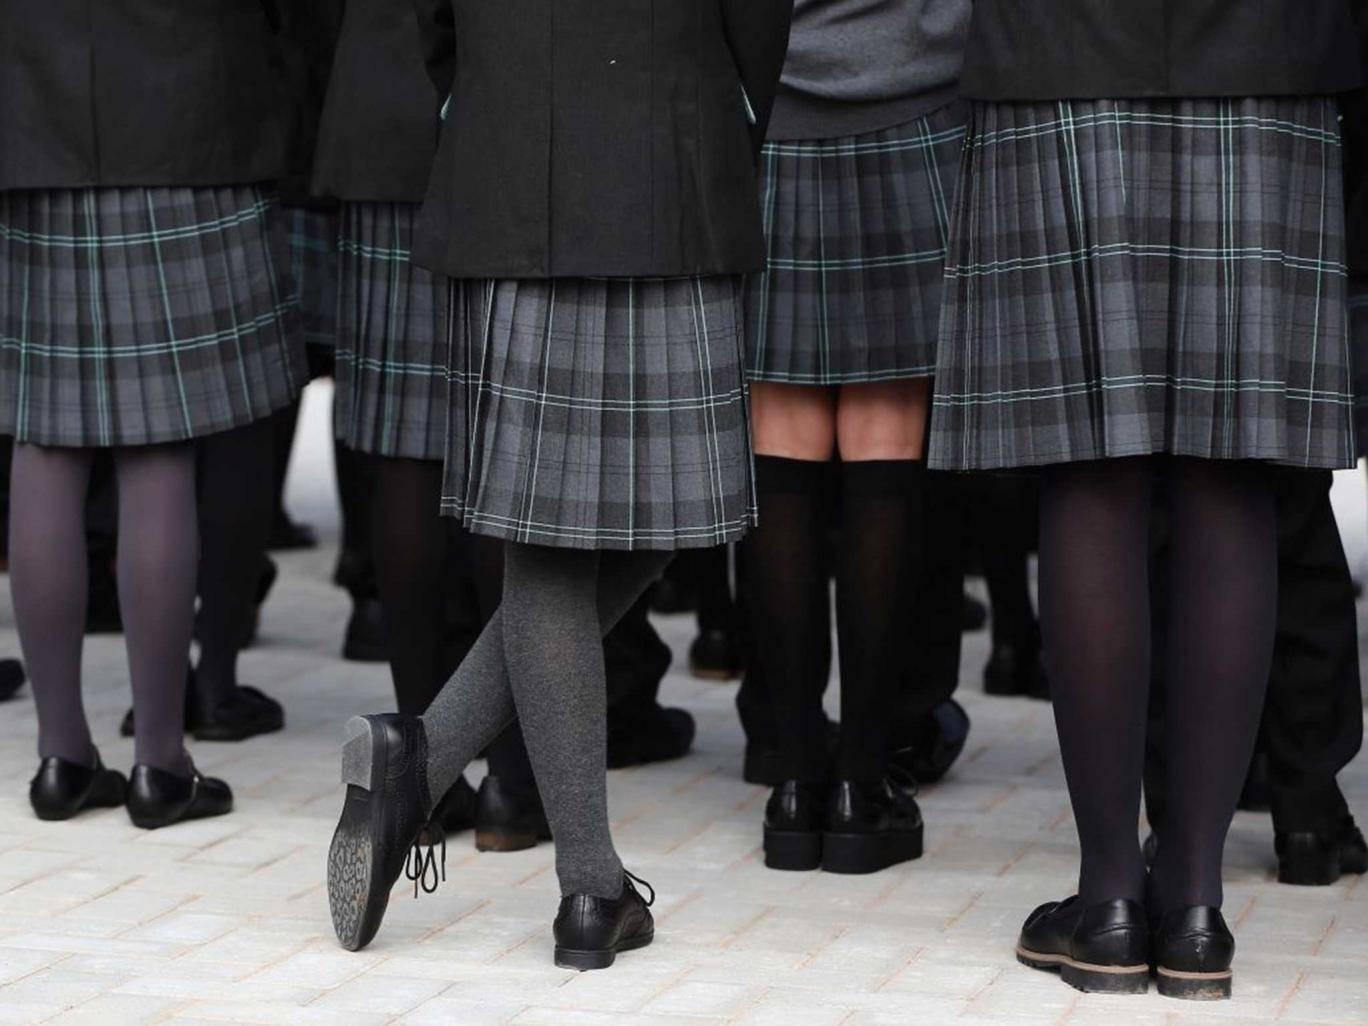 Teacher Student Uniform Porn - Schoolgirls wear shorts under uniform to protect themselves against  'upskirting', says teaching union leader | The Independent | The Independent